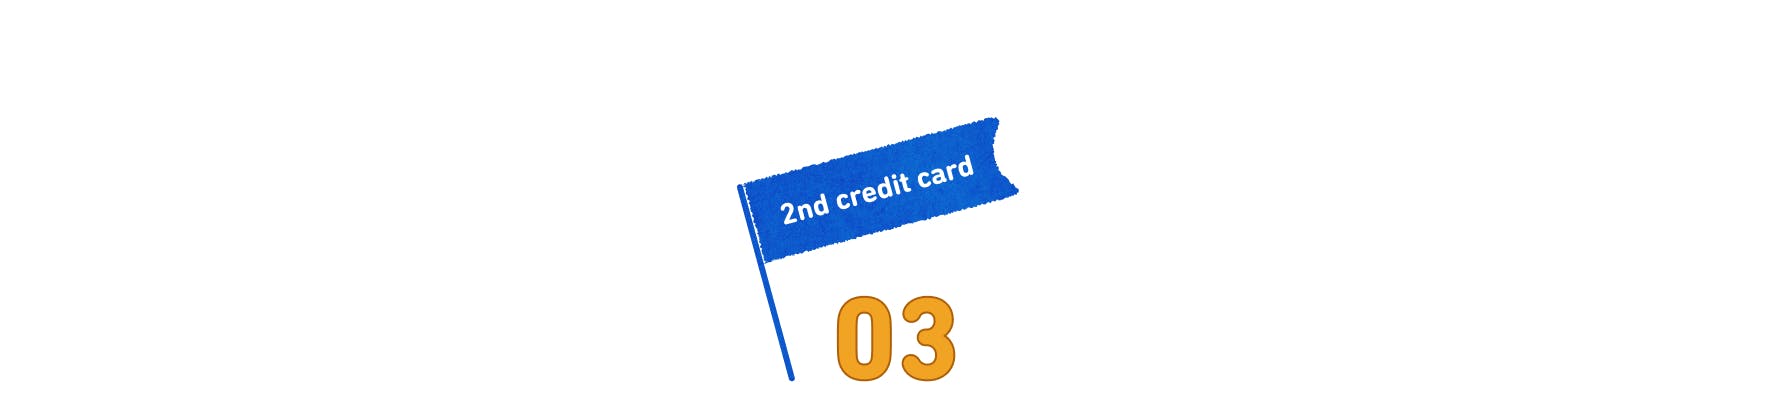 2nd credit card 03